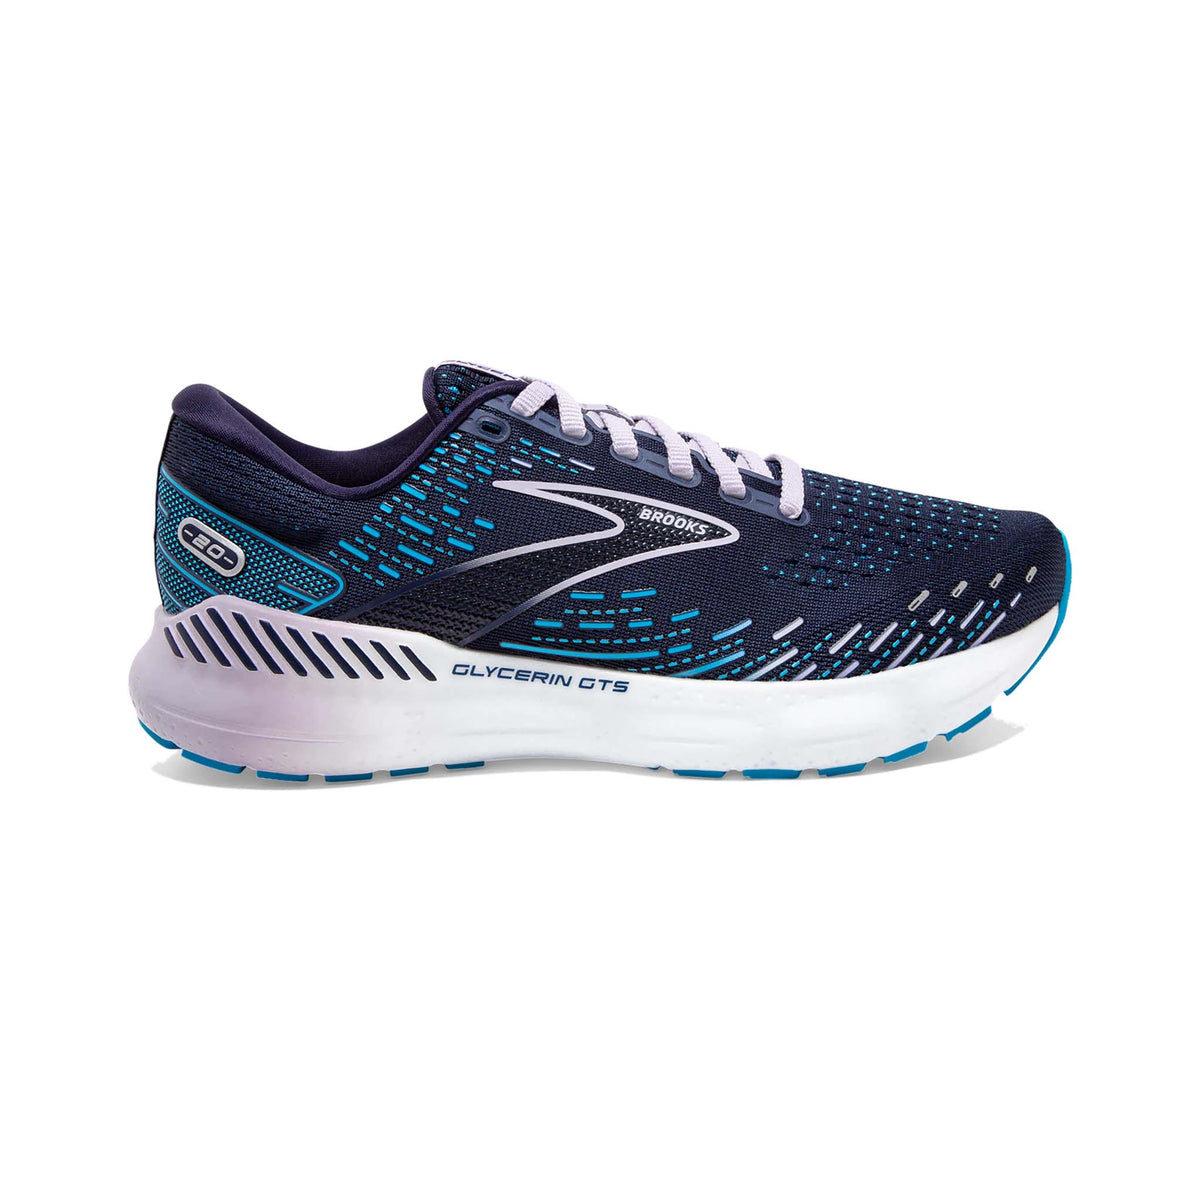 Brooks Glycerin GTS 20 chaussures de course a pied femme peacoat ocean lilac